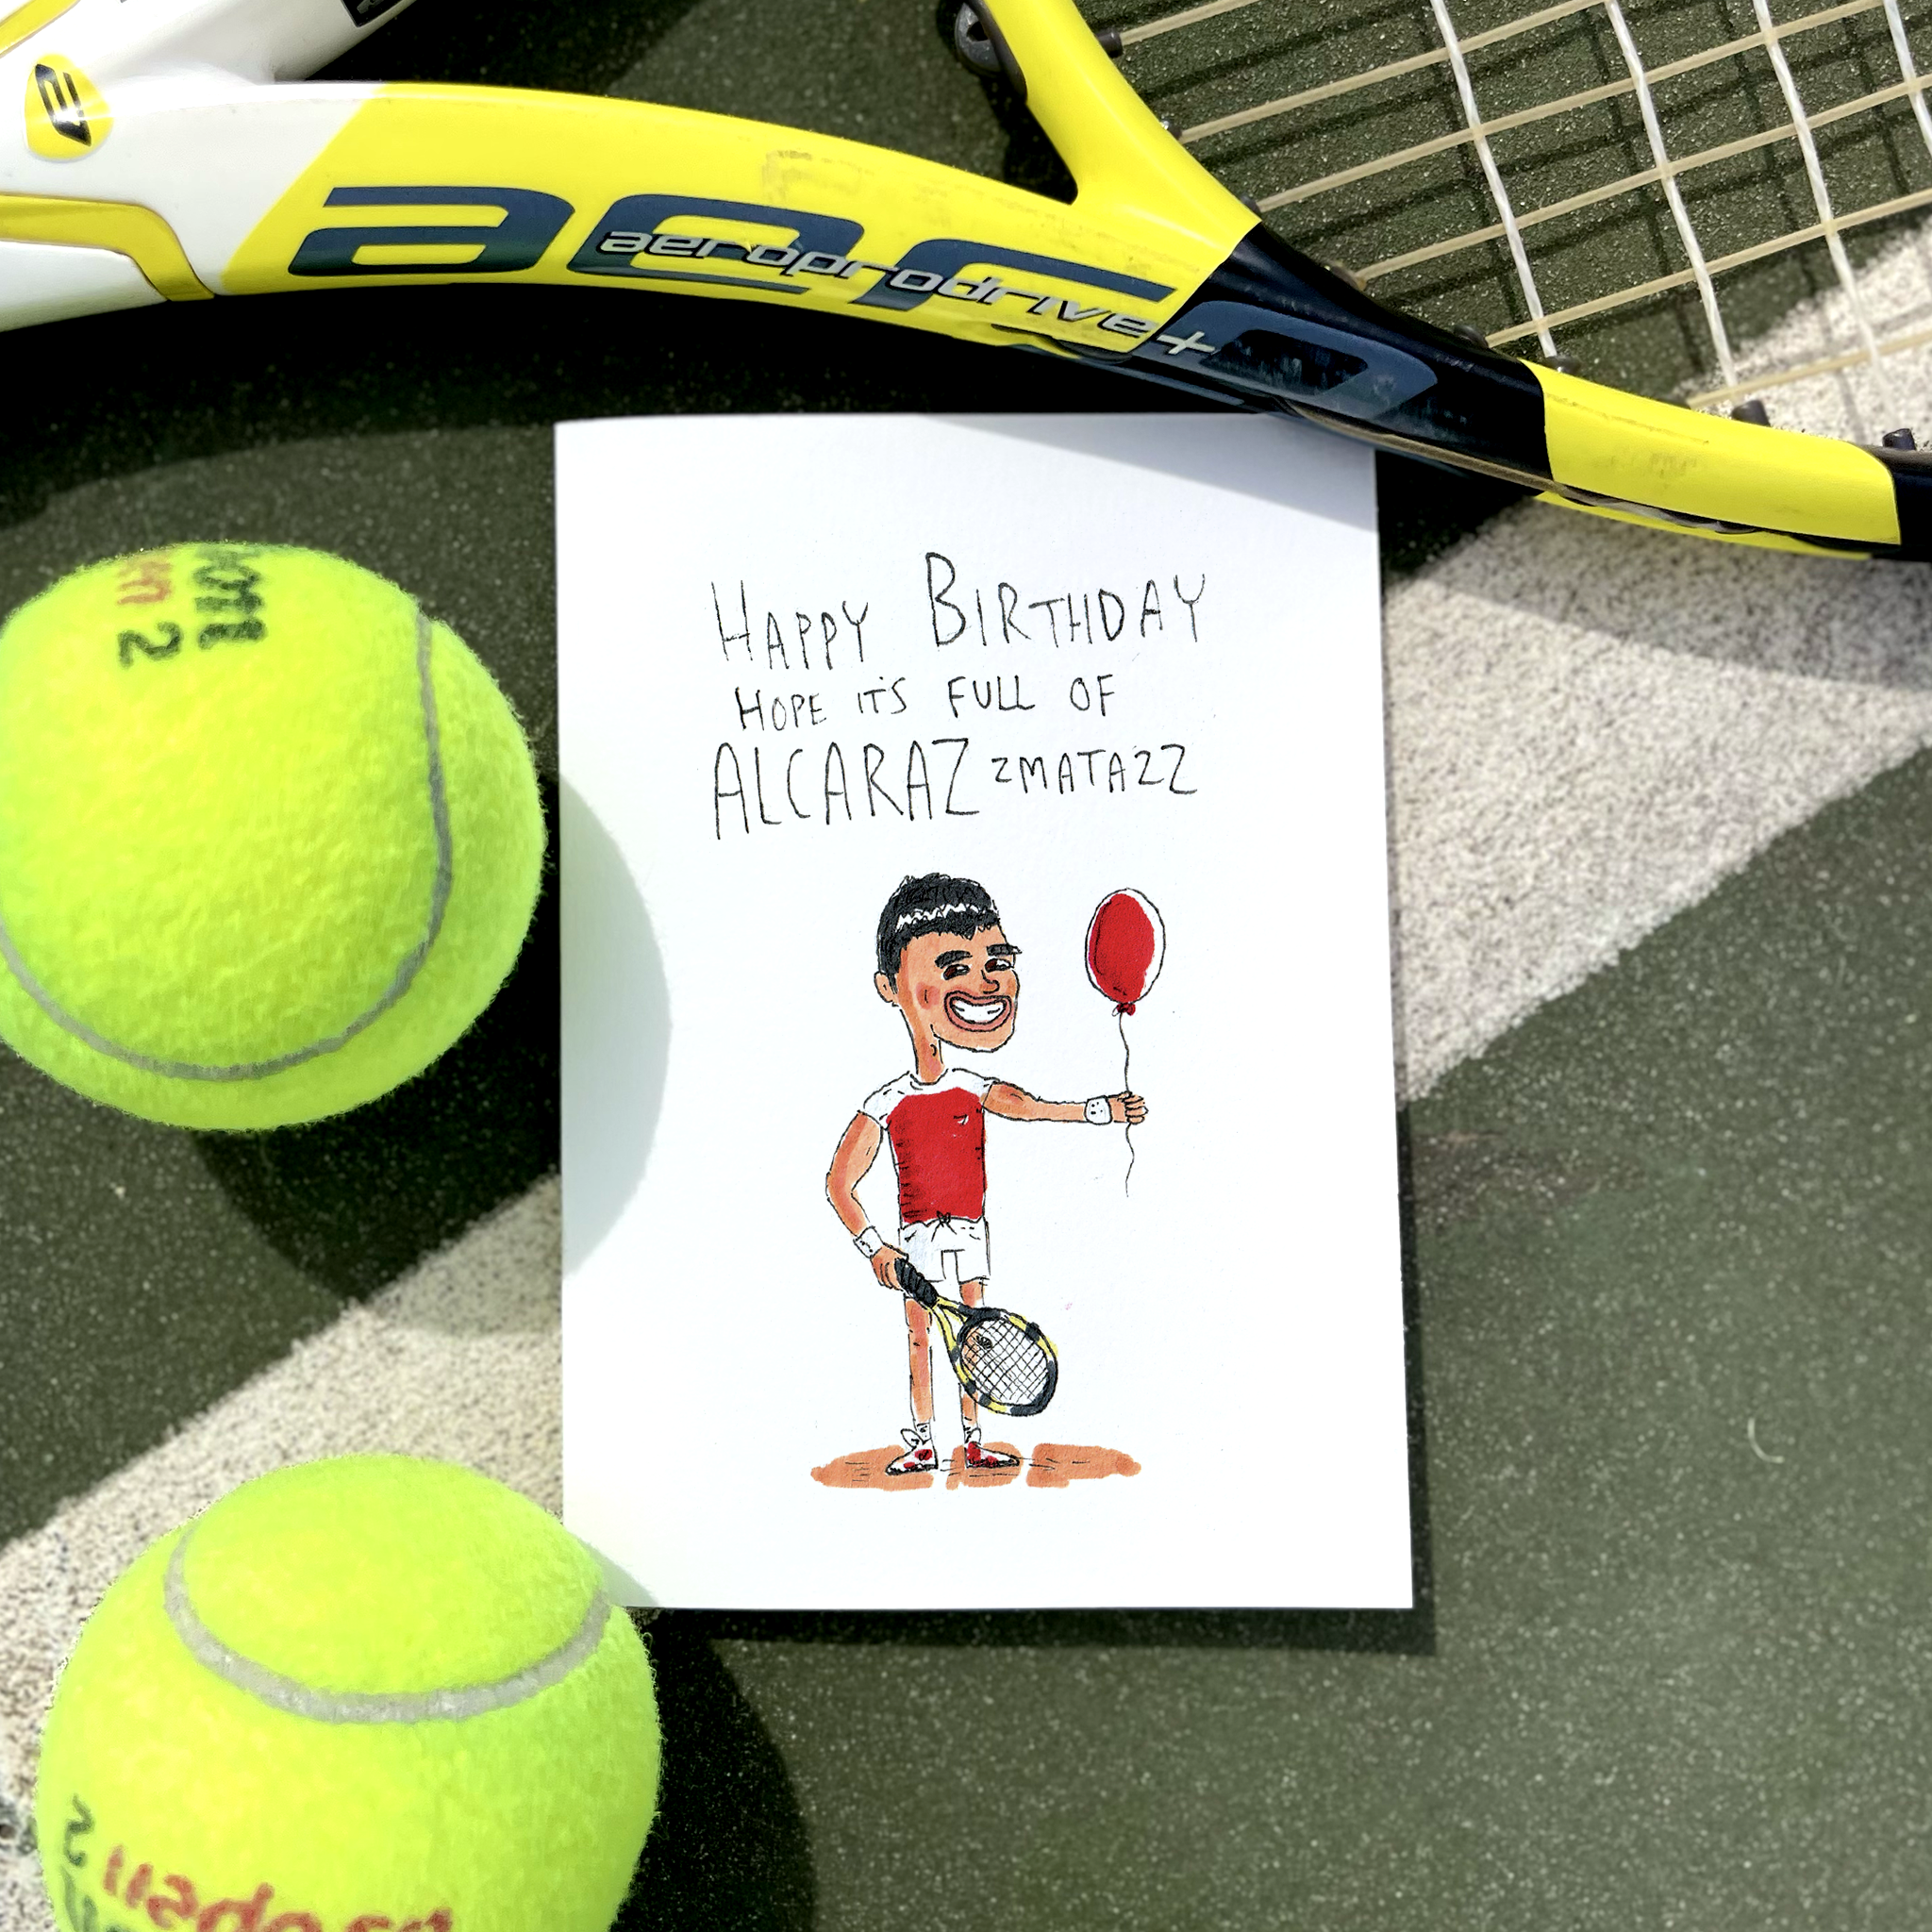 Happy Birthday Hope it's Full of Alacarazzmatazz - TENNIS FANS collection